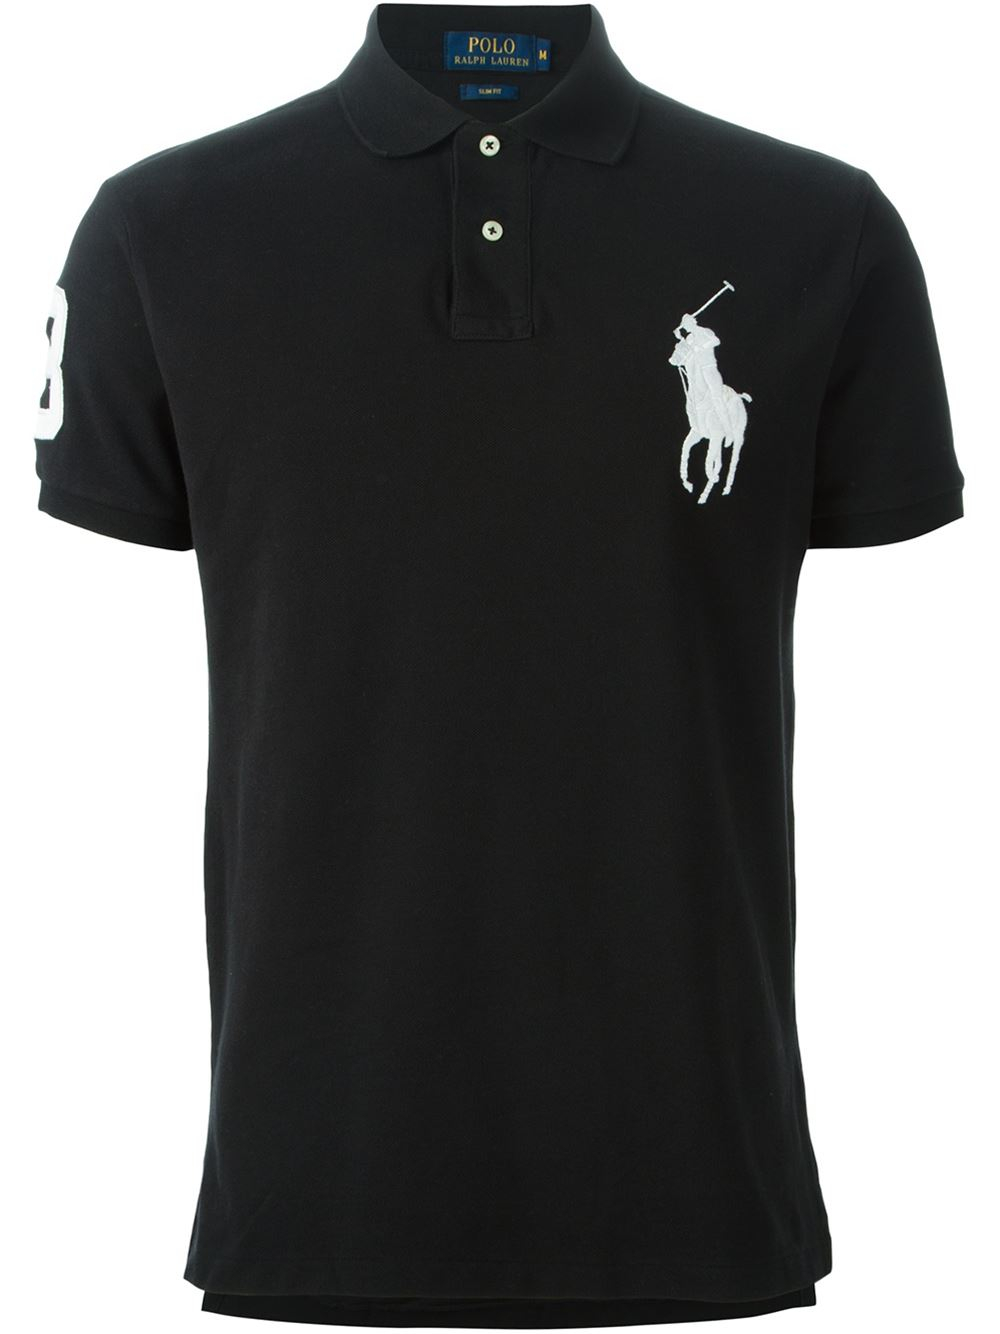 Lyst - Polo Ralph Lauren Logo Embroidered Polo Shirt in Black for Men